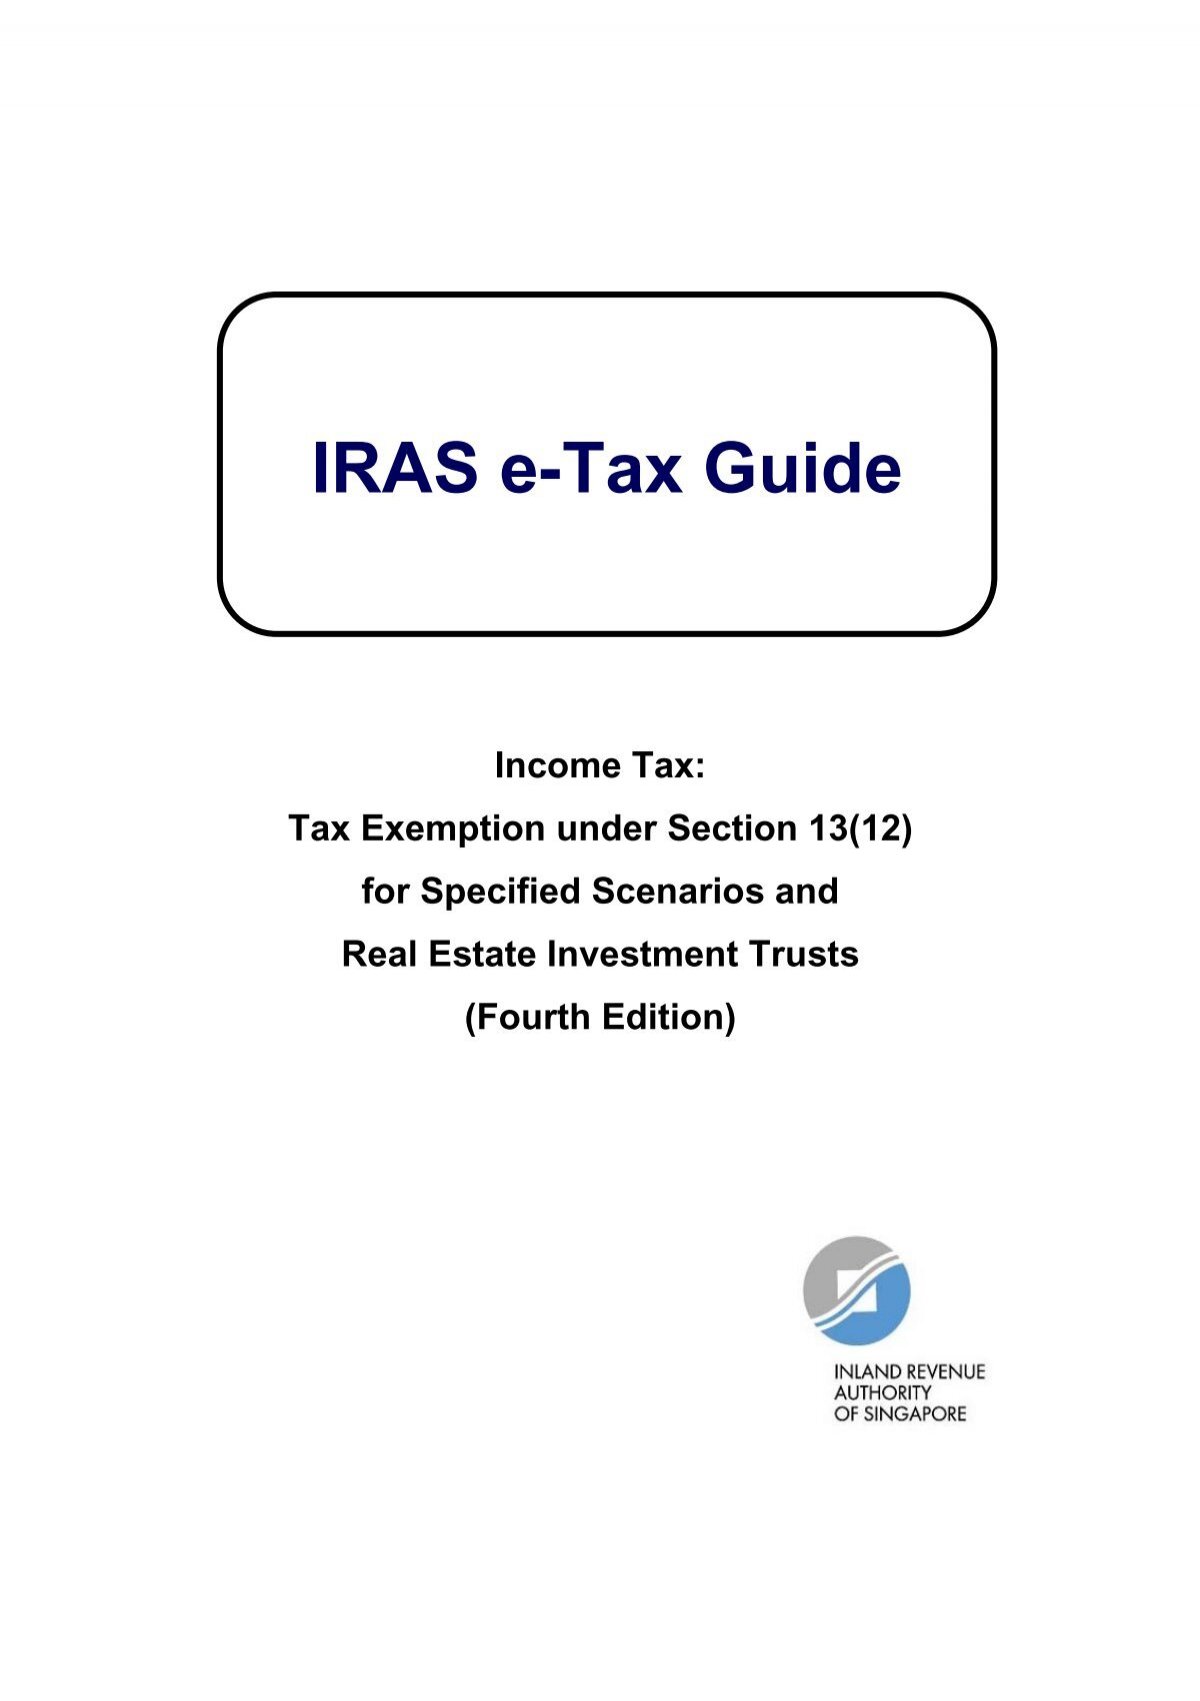 tax-exemption-under-section-13-12-iras